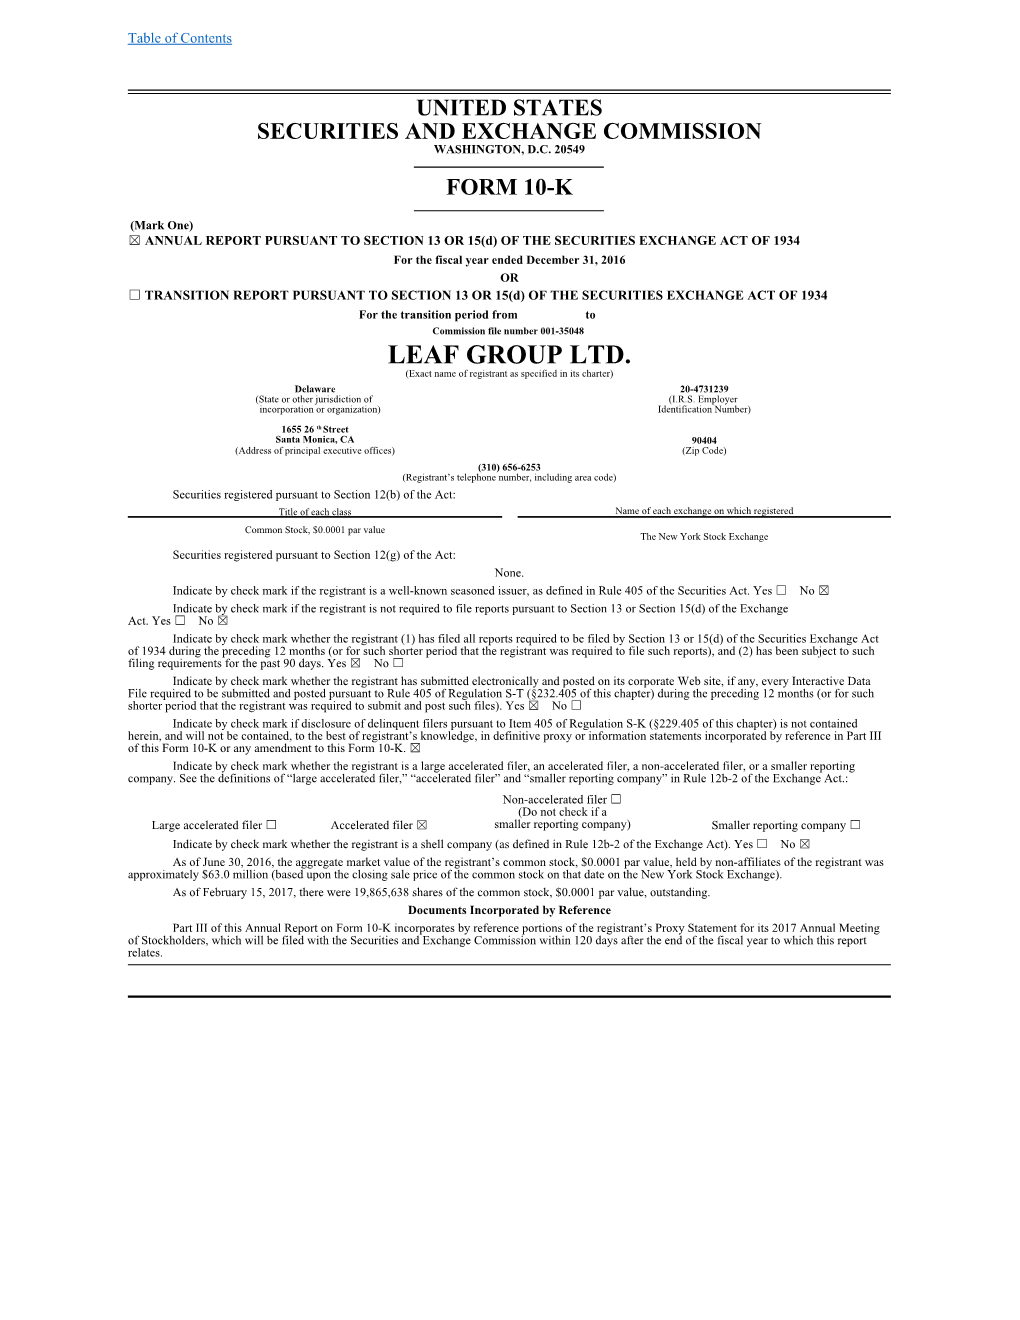 LEAF GROUP LTD. (Exact Name of Registrant As Specified in Its Charter)